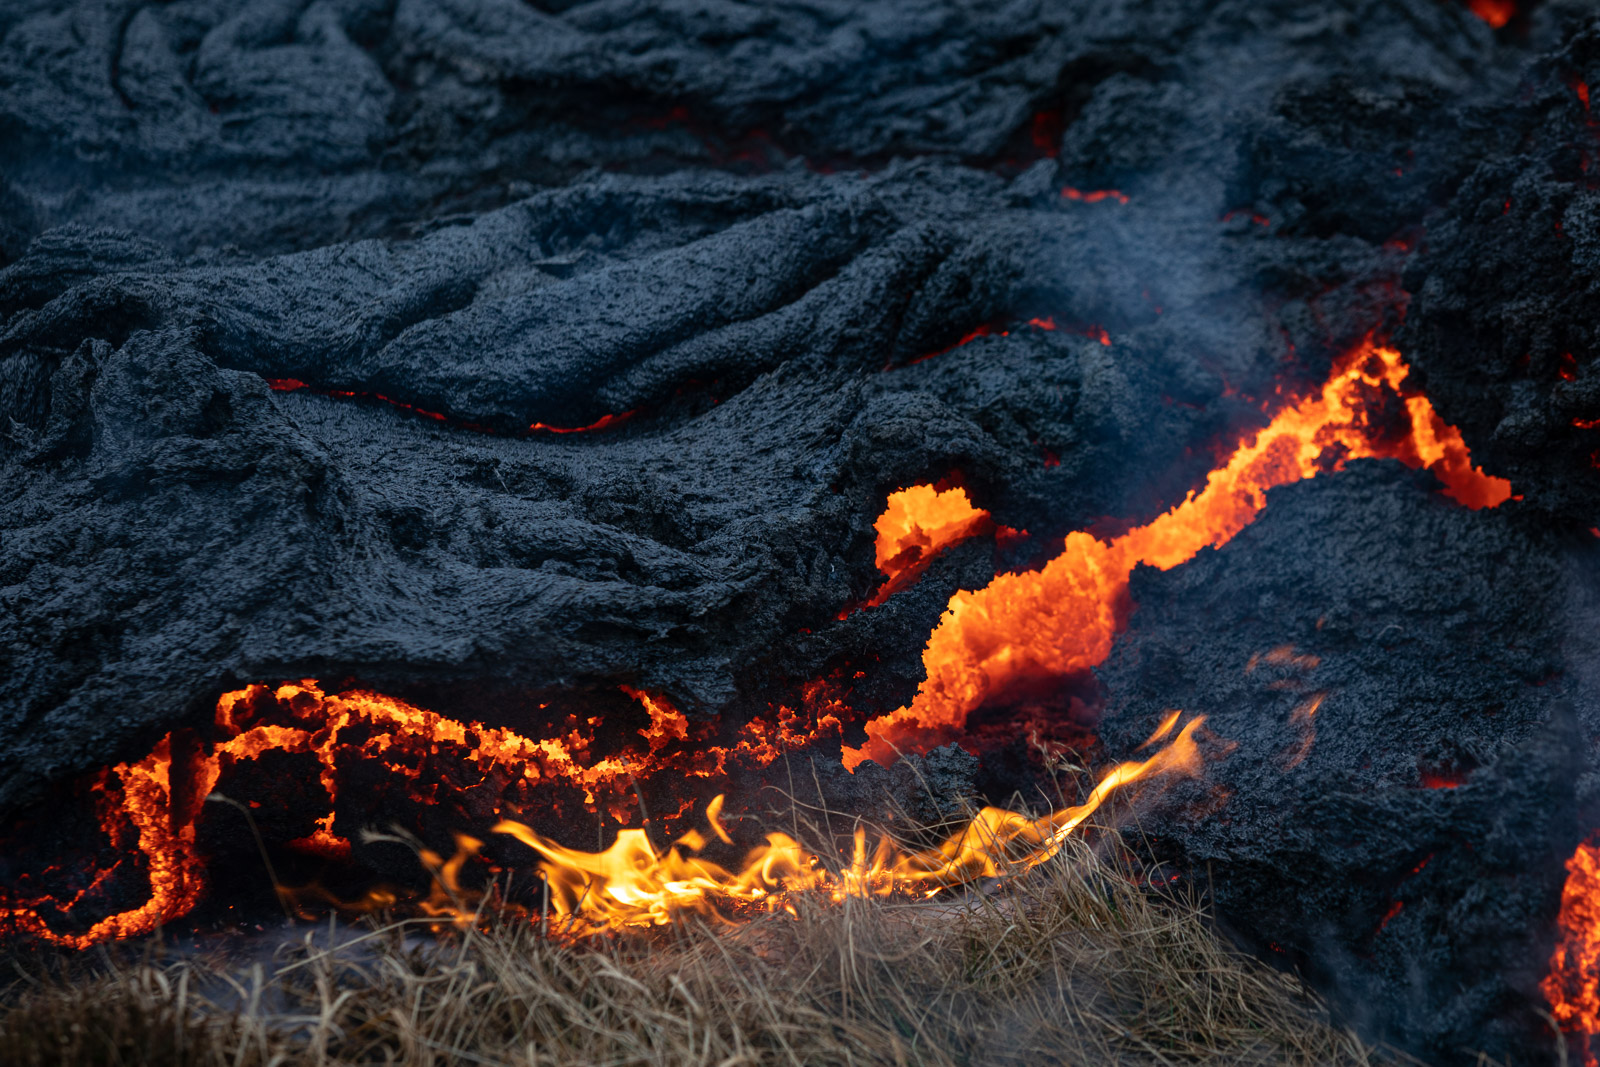 From Iceland - Lava from Geldingadalur is the most primitive Iceland that has been seen for 7000 years